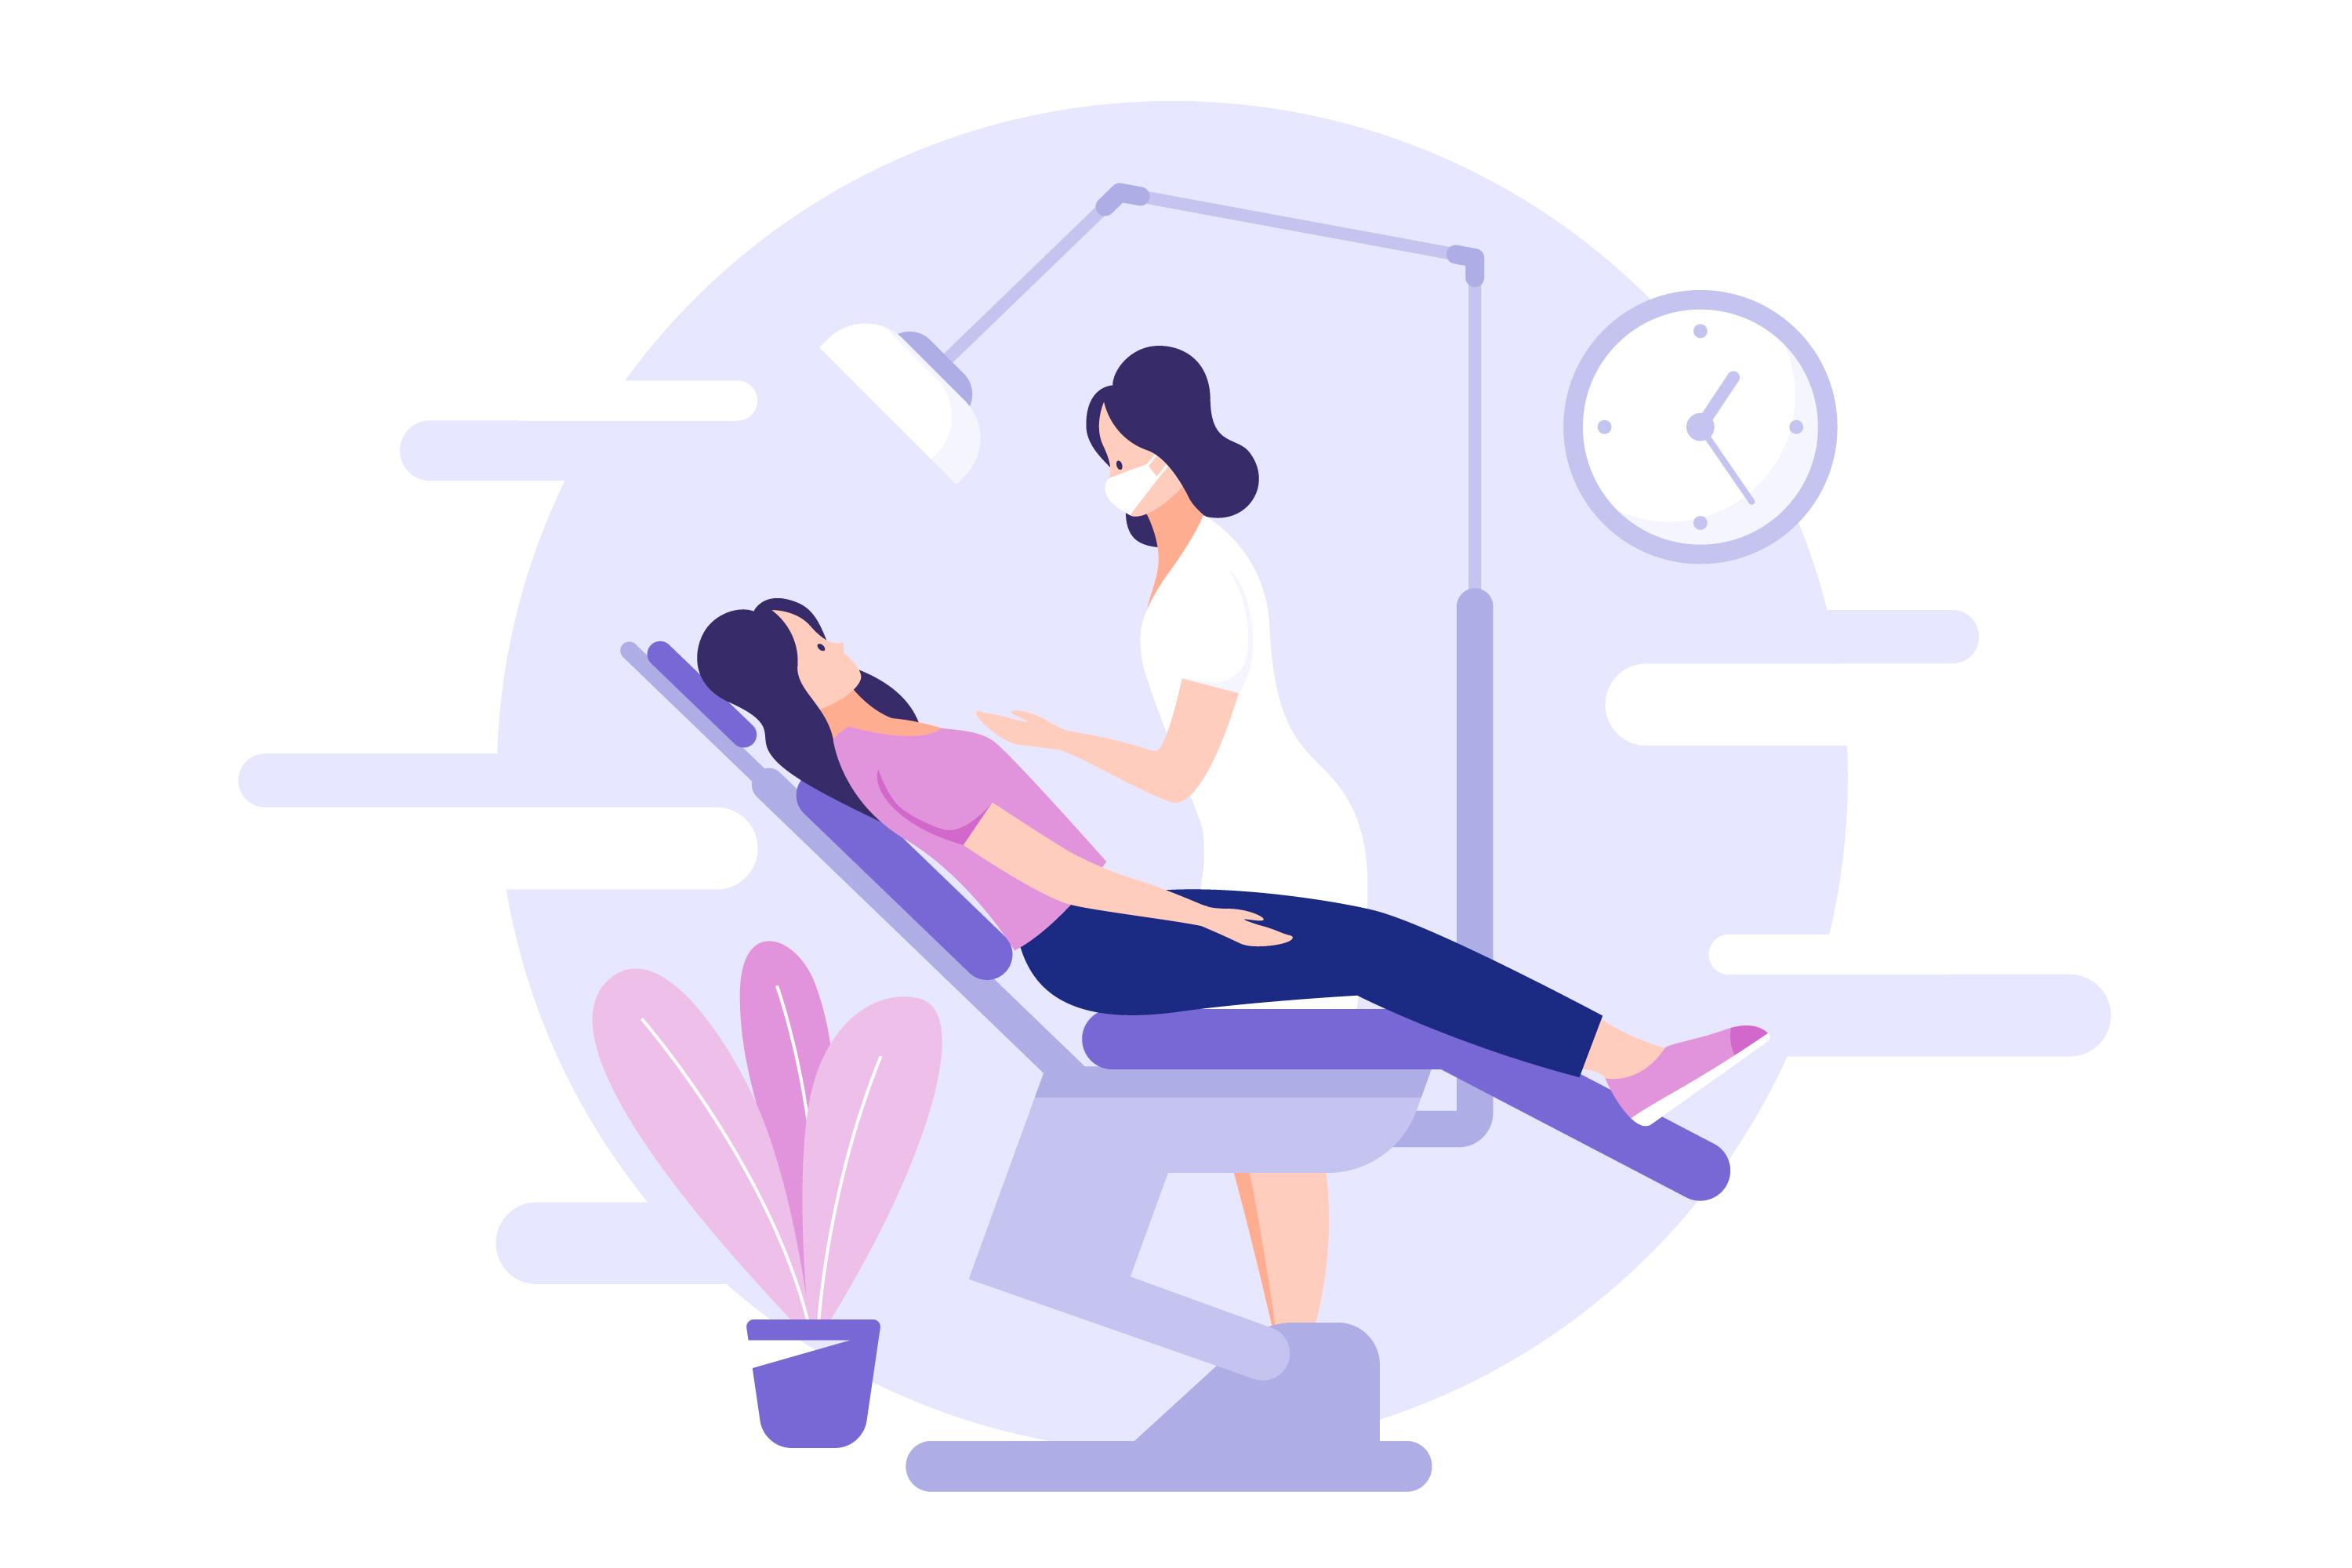 illustration of a person lying in a dentist's chair and another person
            standing next to them, apparently performing a dental procedure.
            The environment is clean and calm, with a clock on the wall and a
            plant on the floor